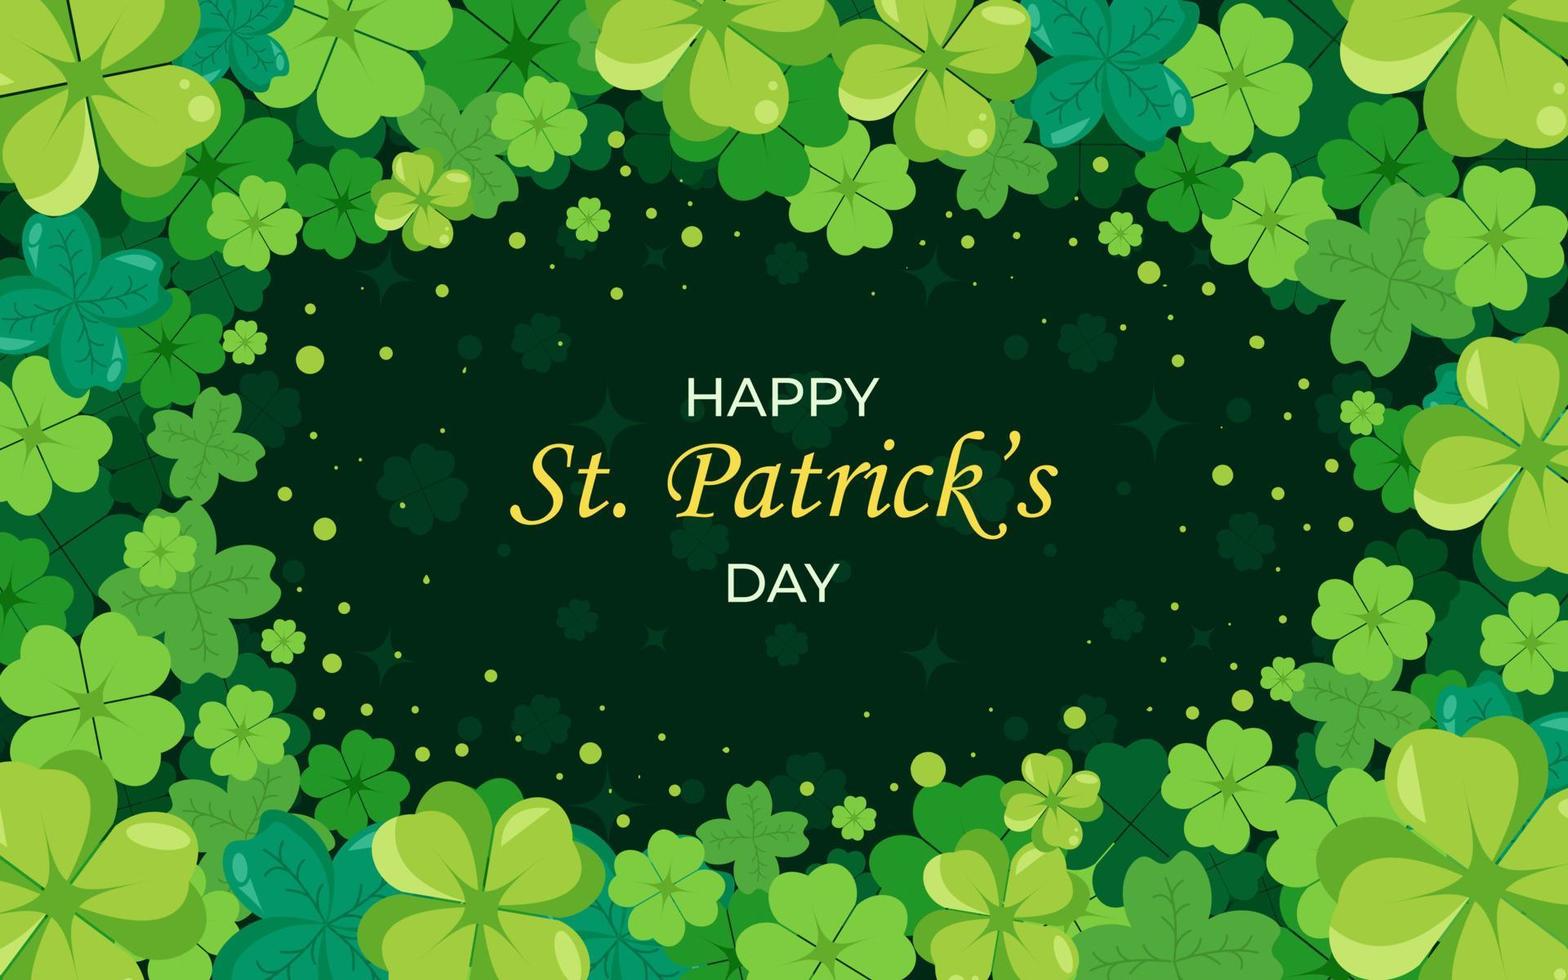 St Patrick's Day Background vector